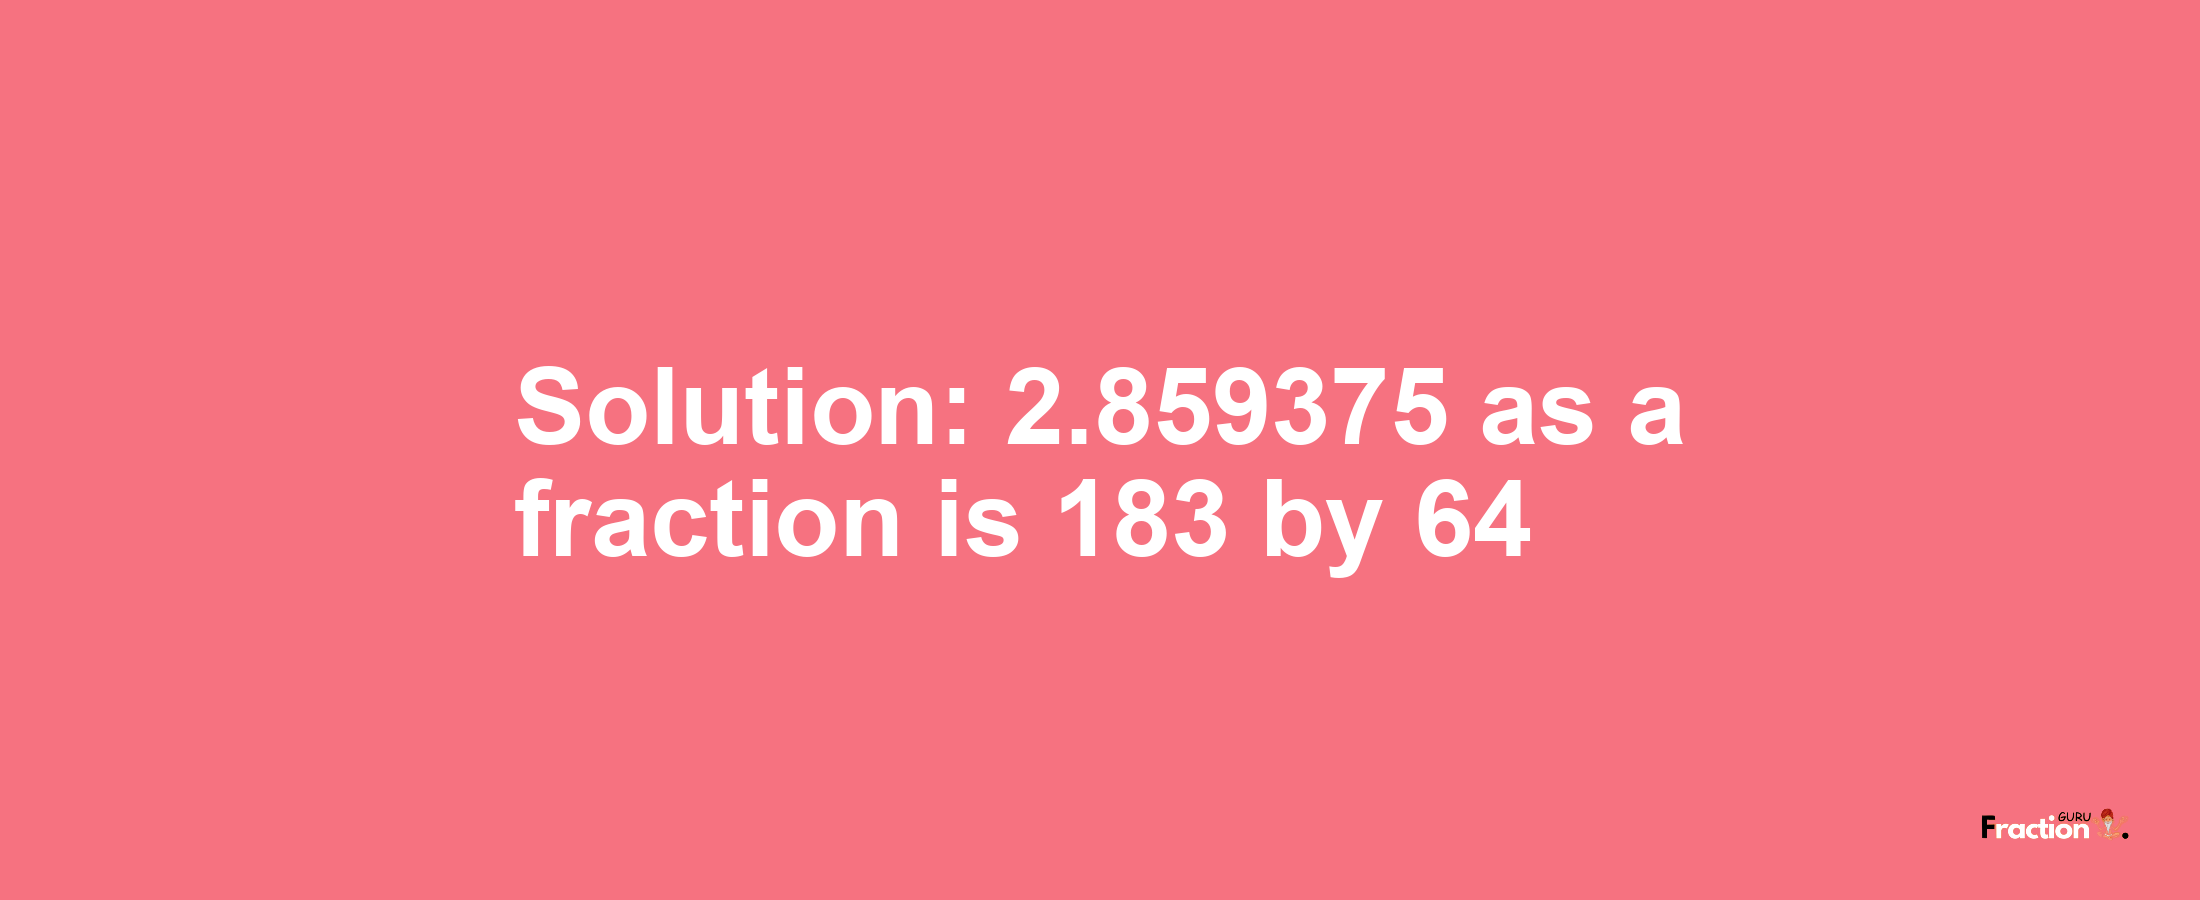 Solution:2.859375 as a fraction is 183/64